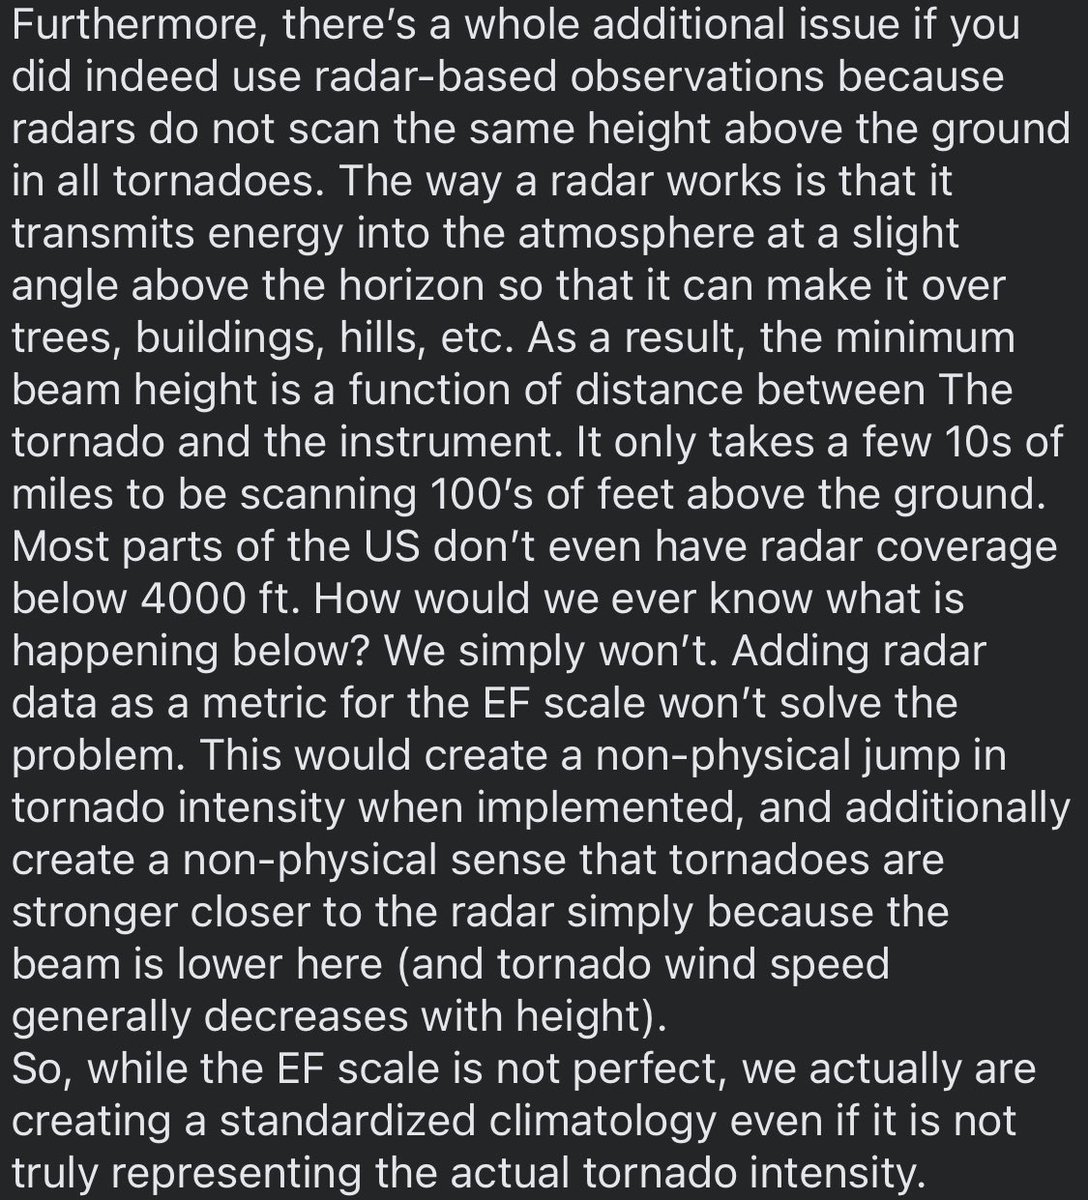 A (very correct) perspective from one of the most brilliant minds in tornado research (@WxMomOU) on the EF scale: